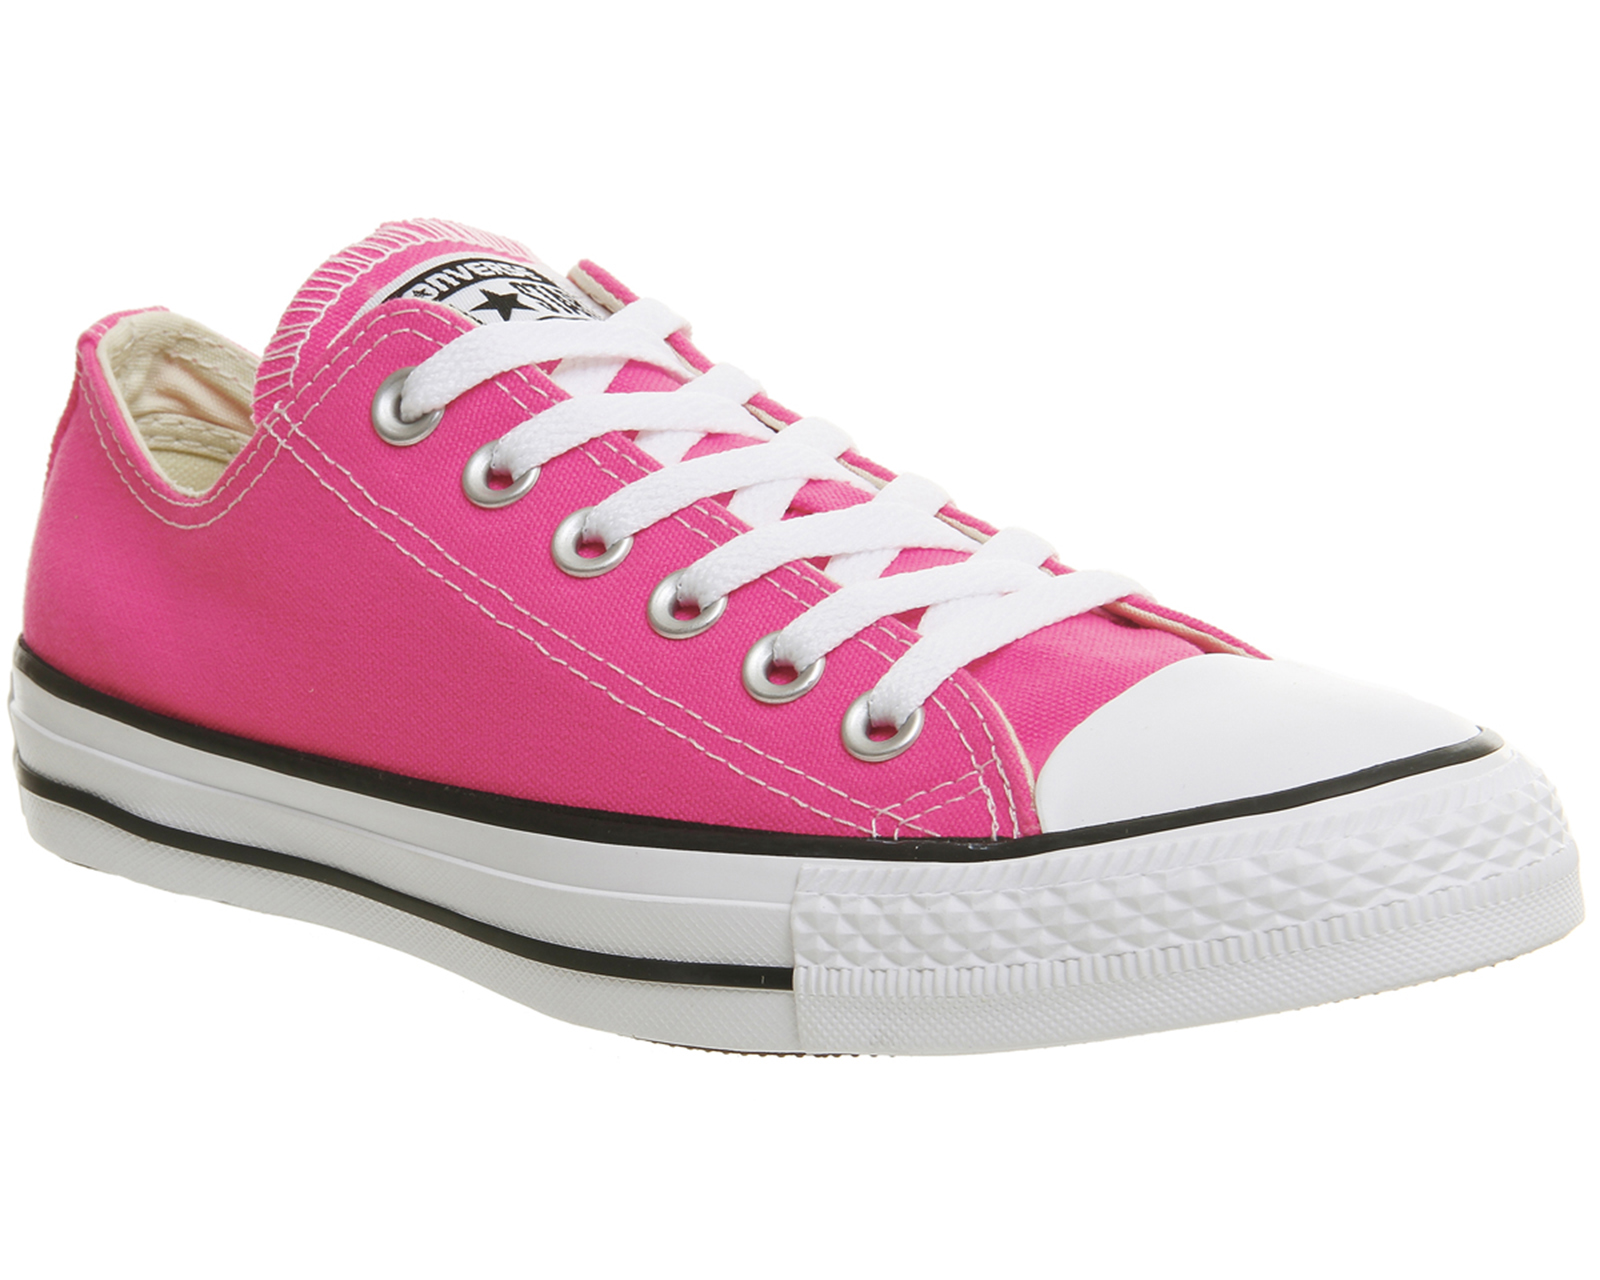 Converse Bright Pink Factory Outlet A9231 929f2